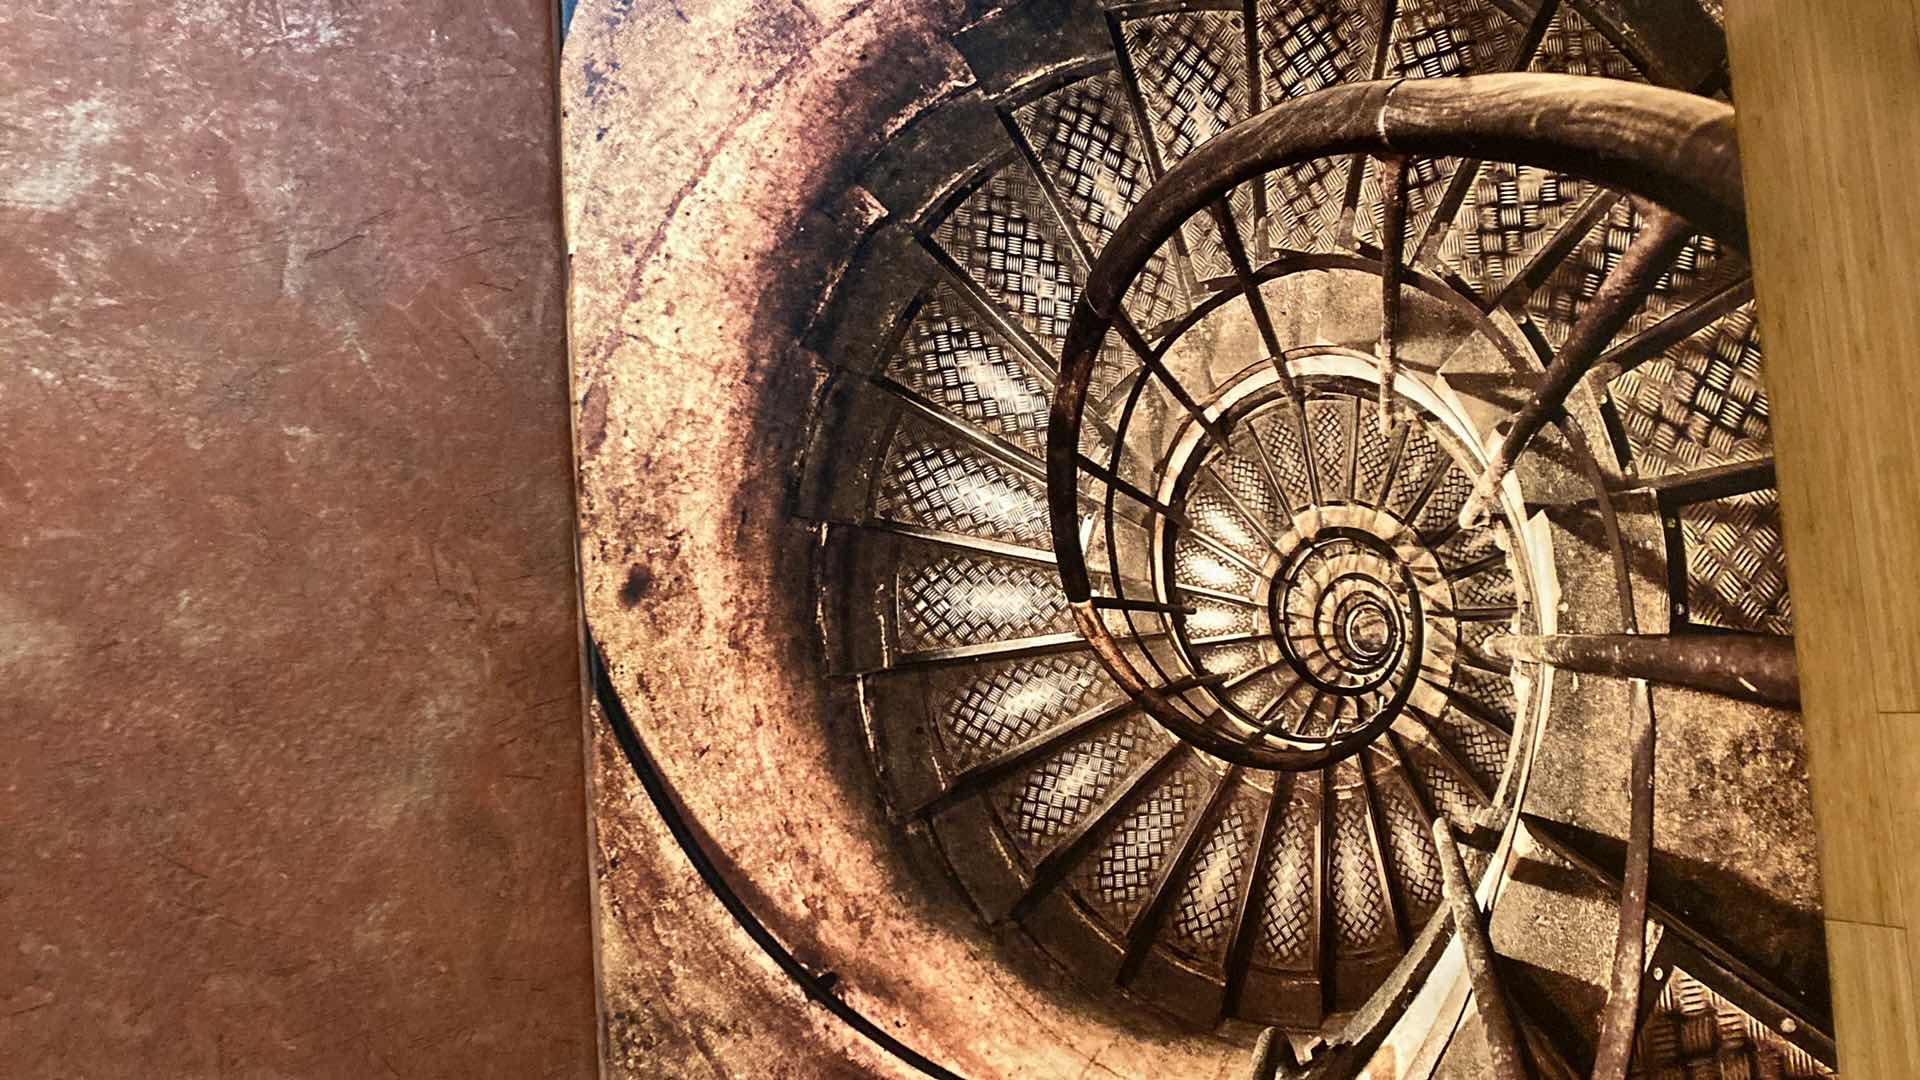 Photo 3 of WRAPPED CANVAS SPIRAL STAIRCASE ART WORK 40” x 60”